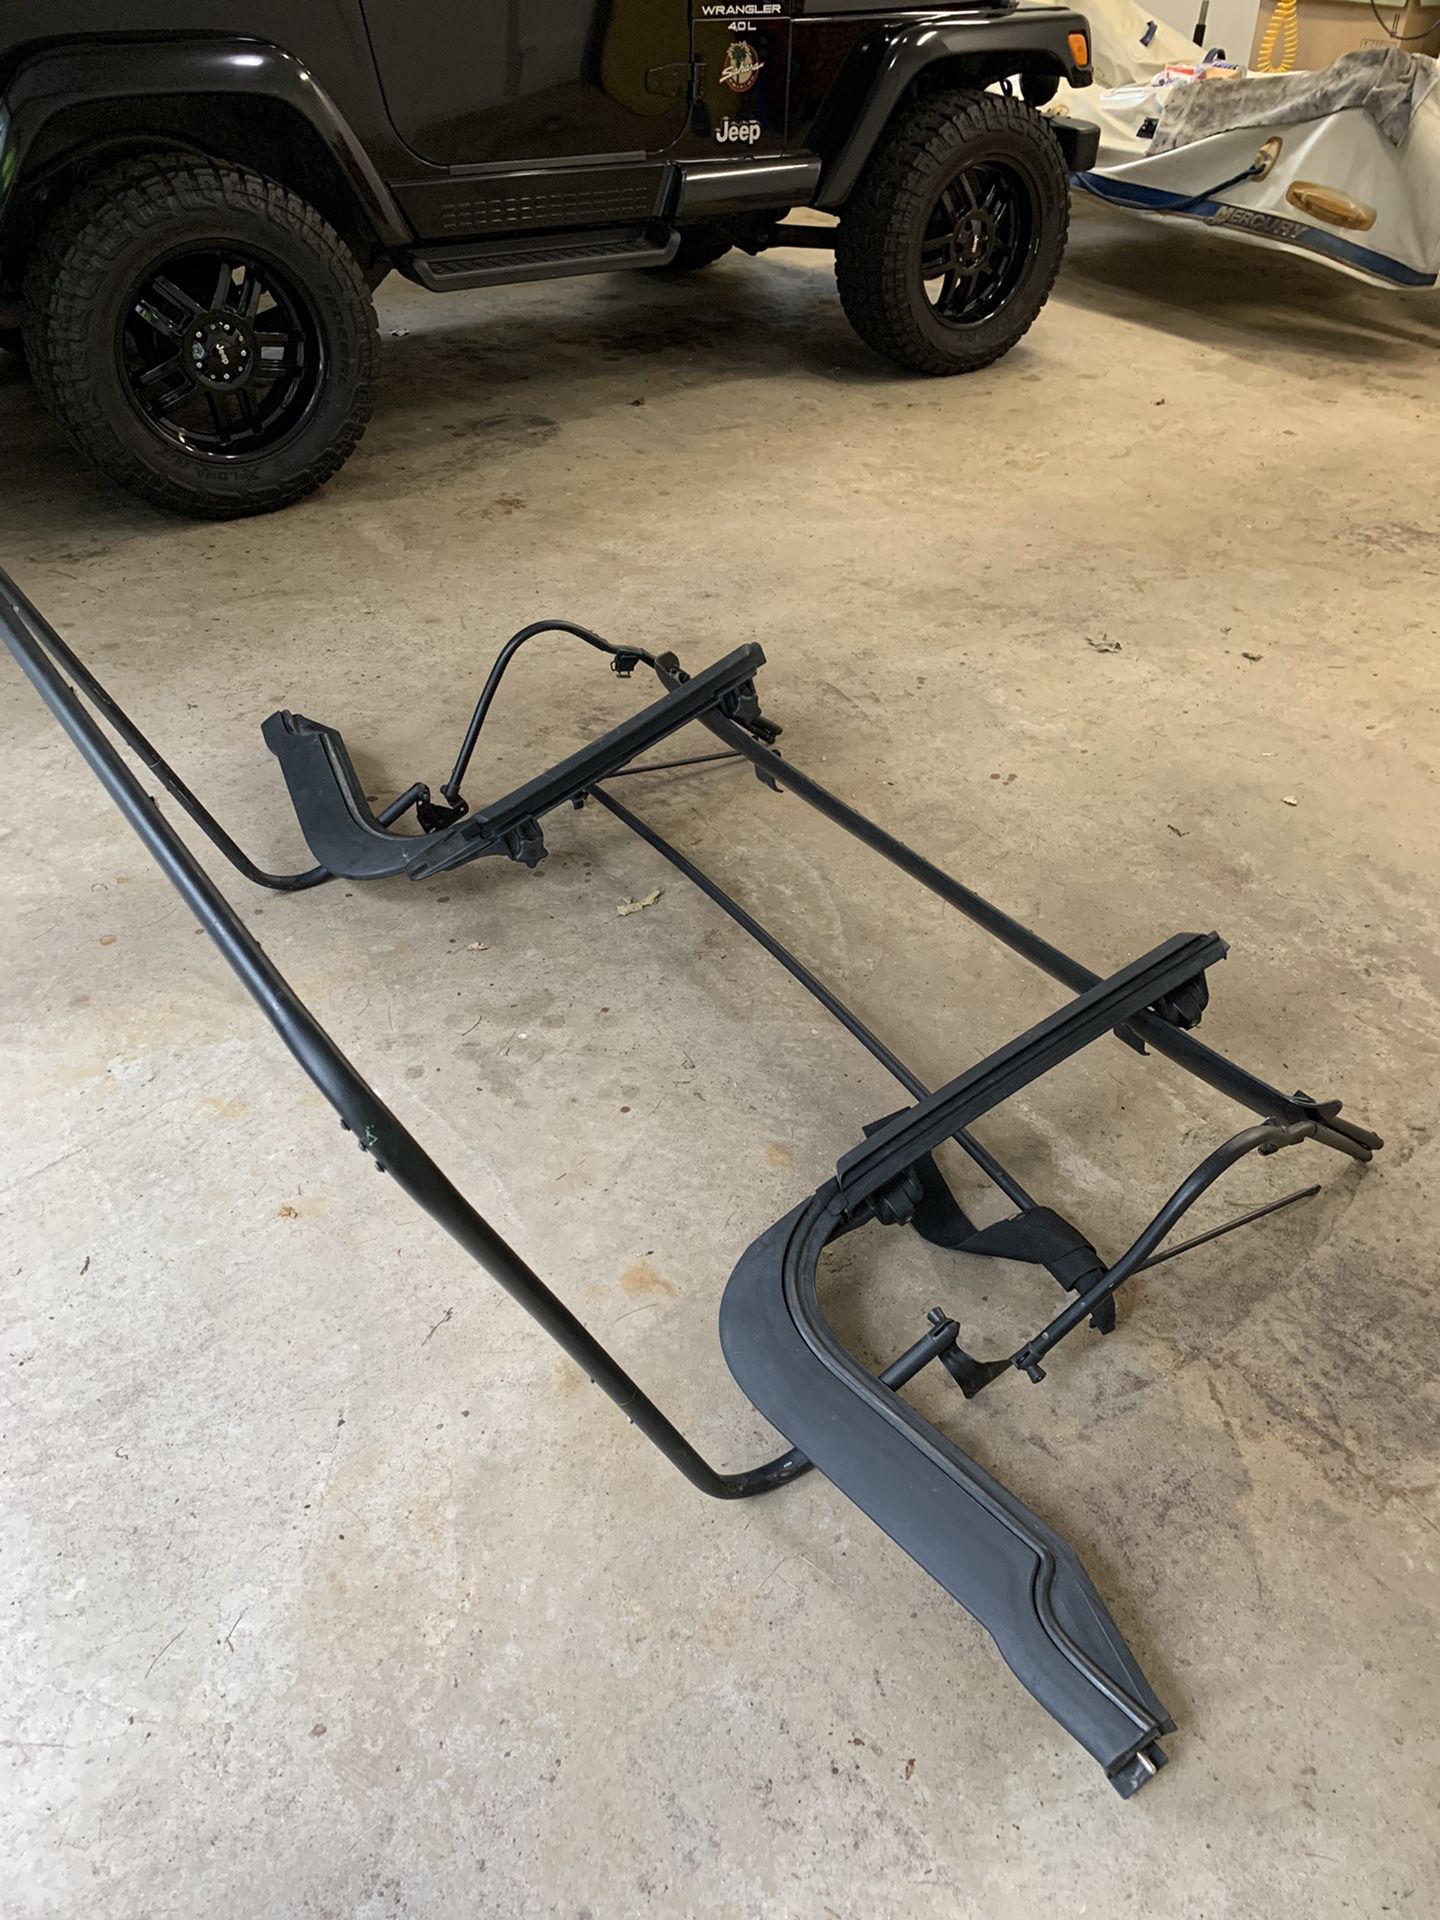 Jeep Wrangler Complete Soft Top Hardware, W/ Sunroof Flip , $200. Or B.O.